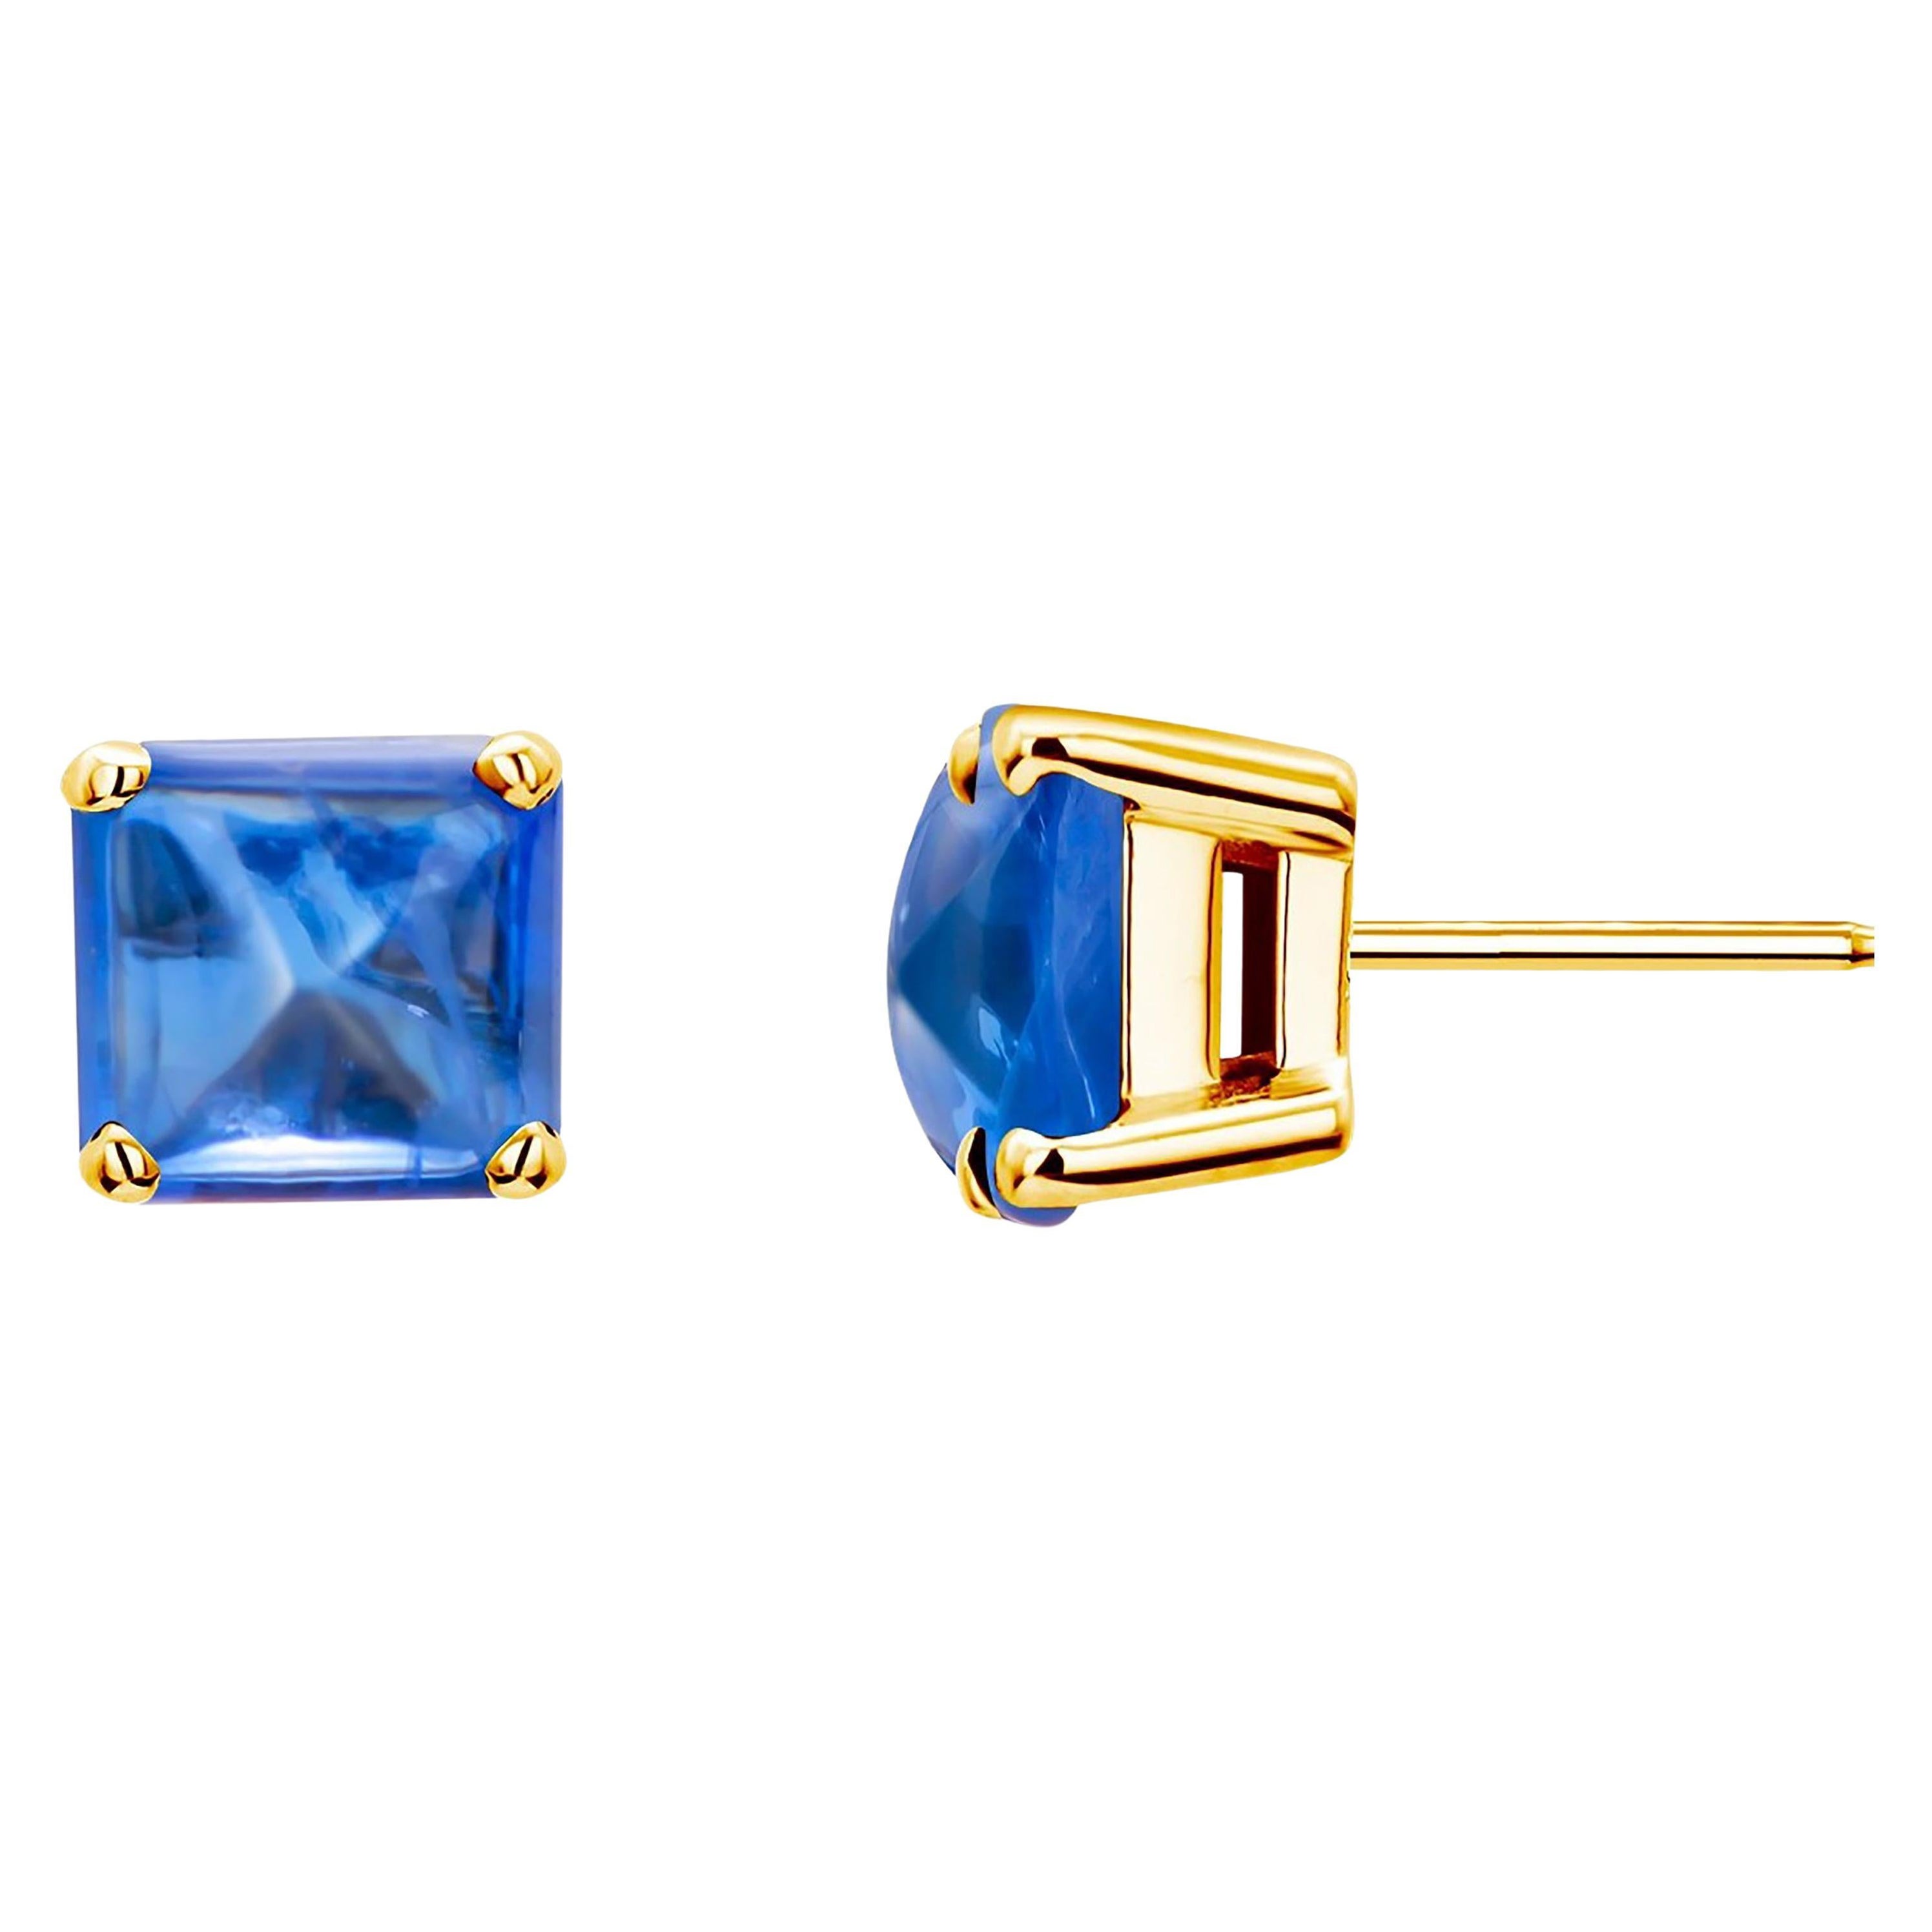 Square Shaped Sugarloaf Ceylon Cabochon Sapphire 1.20 Carat Gold Stud Earrings For Sale